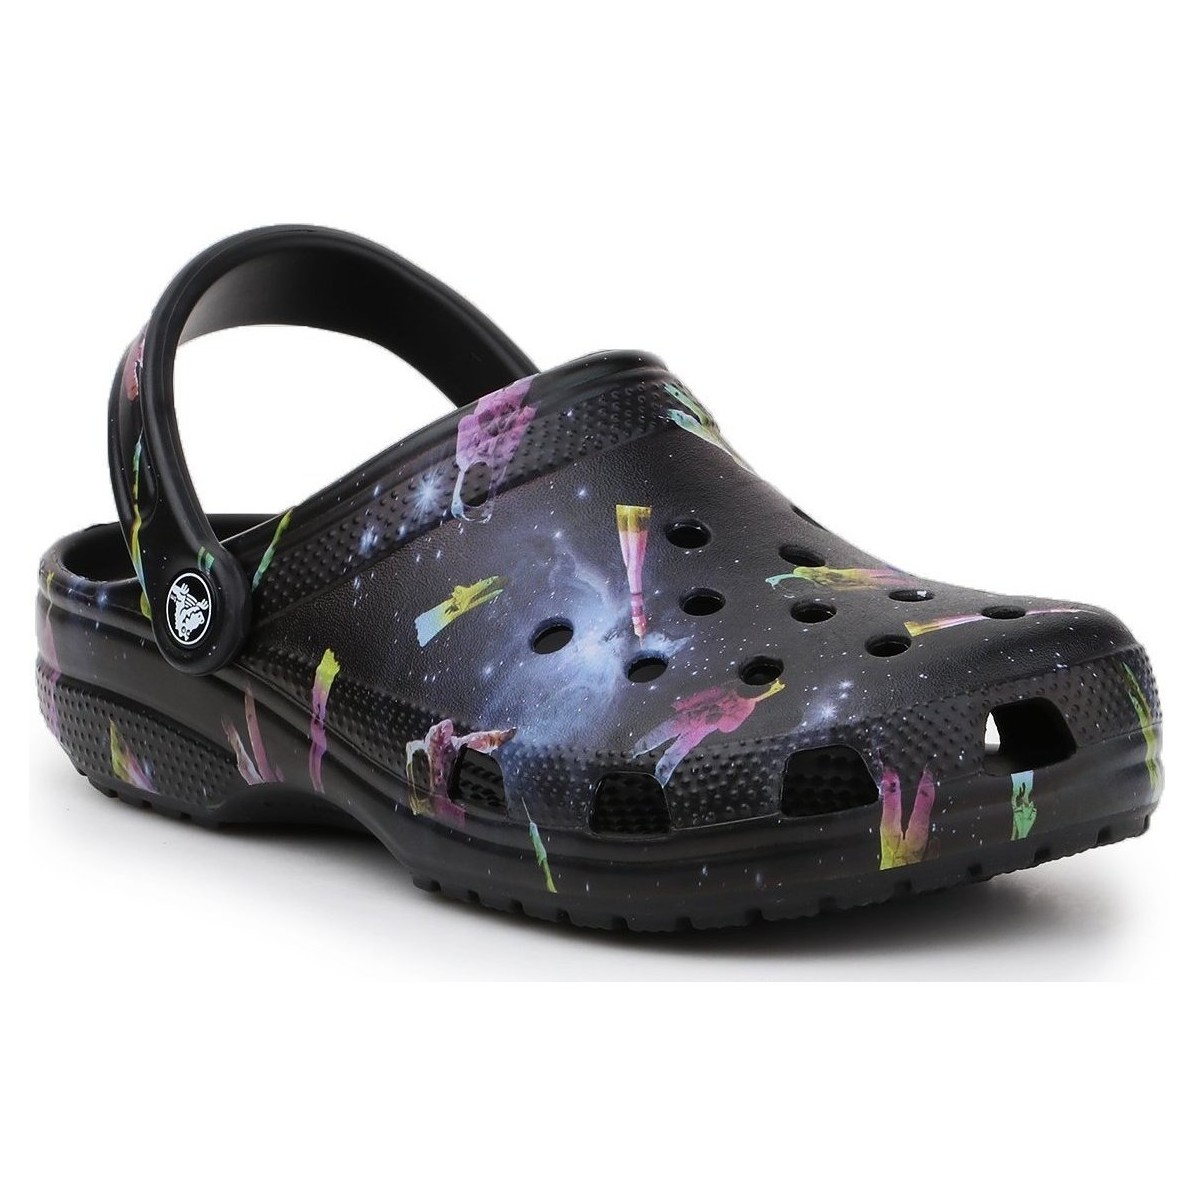 Shoes Children Sandals Crocs Classic Out Of This World II 206818-001 Black